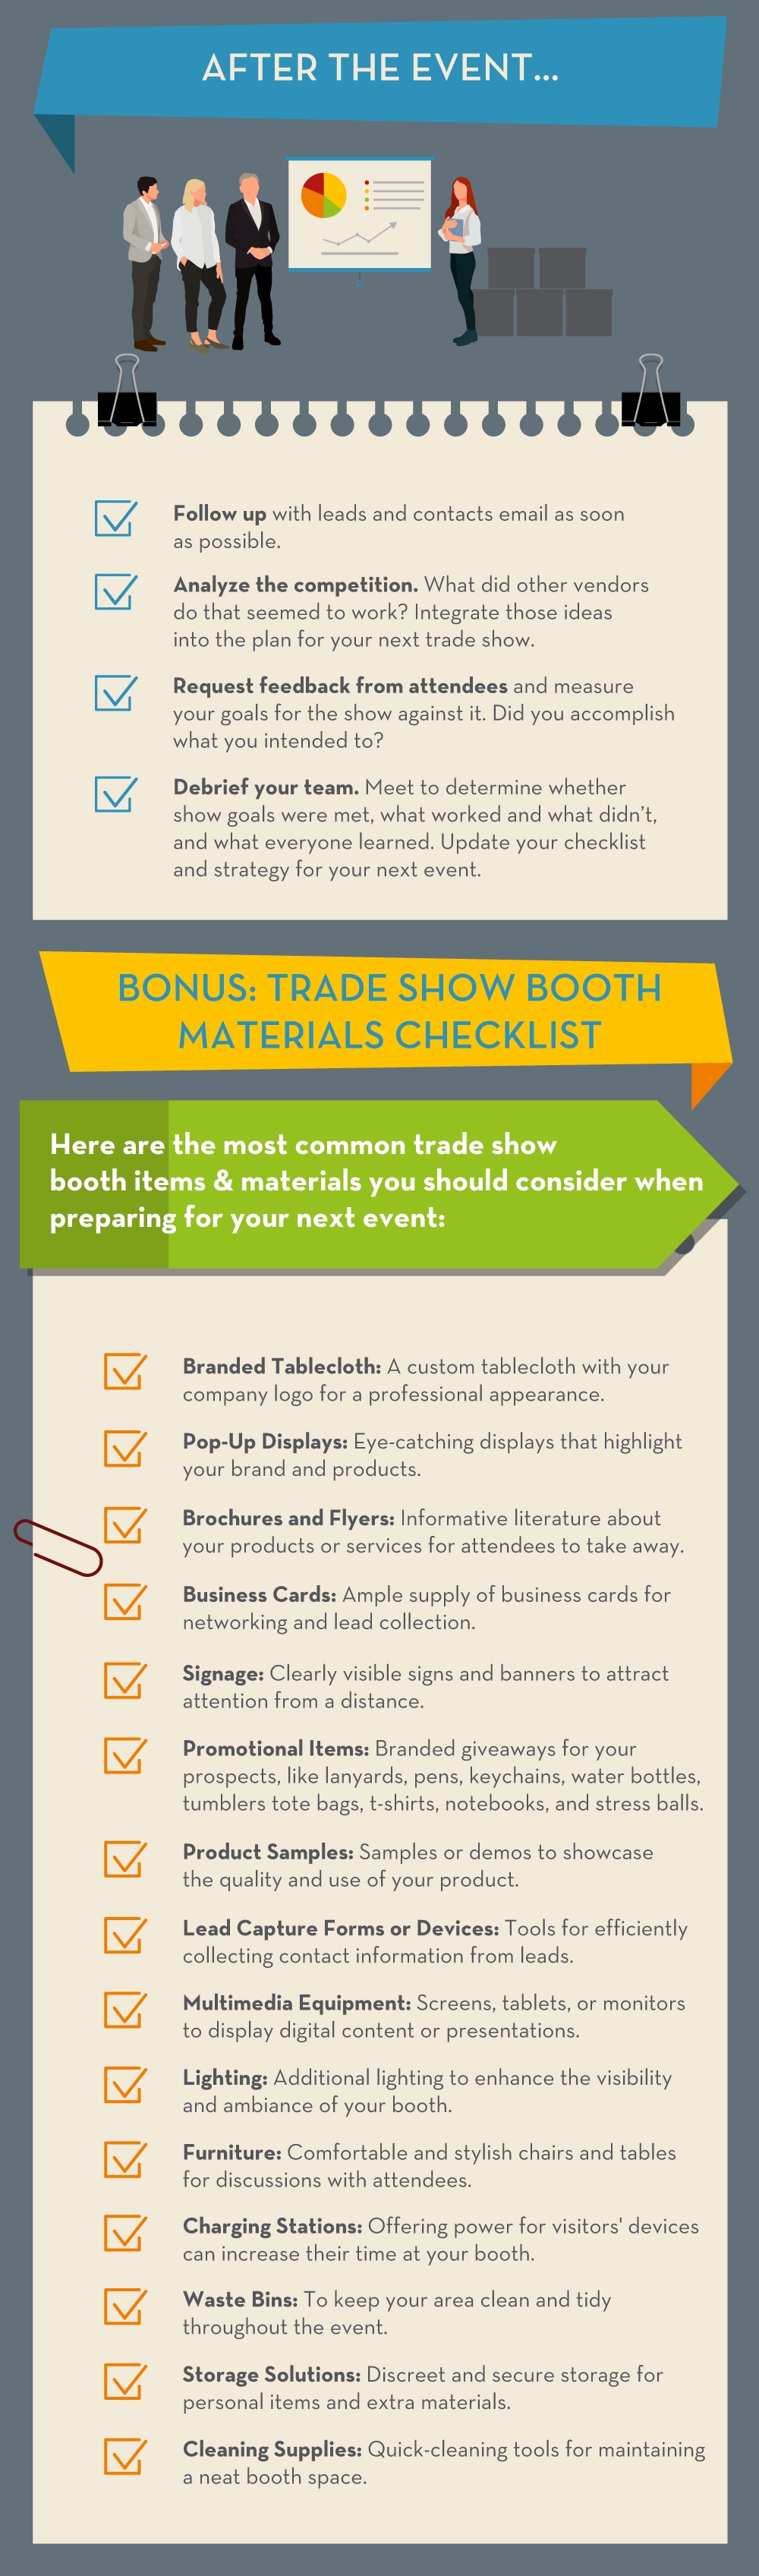 Trade Show Planning After the Event and Materials Checklists